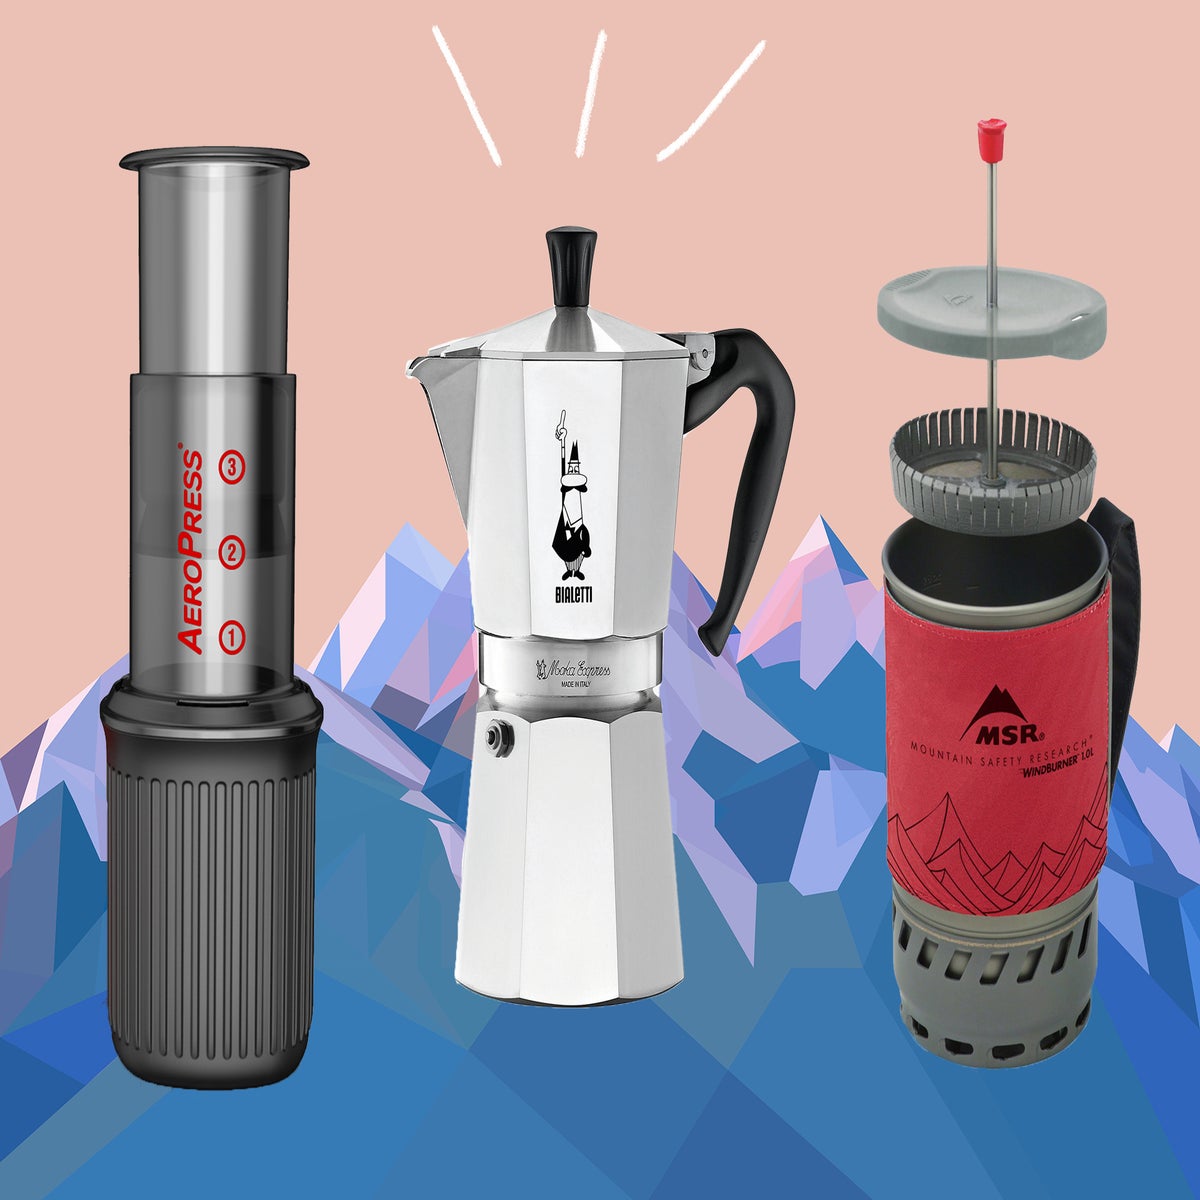 How to Use a Percolator to Make Coffee When Camping - Go Outdoors Camping